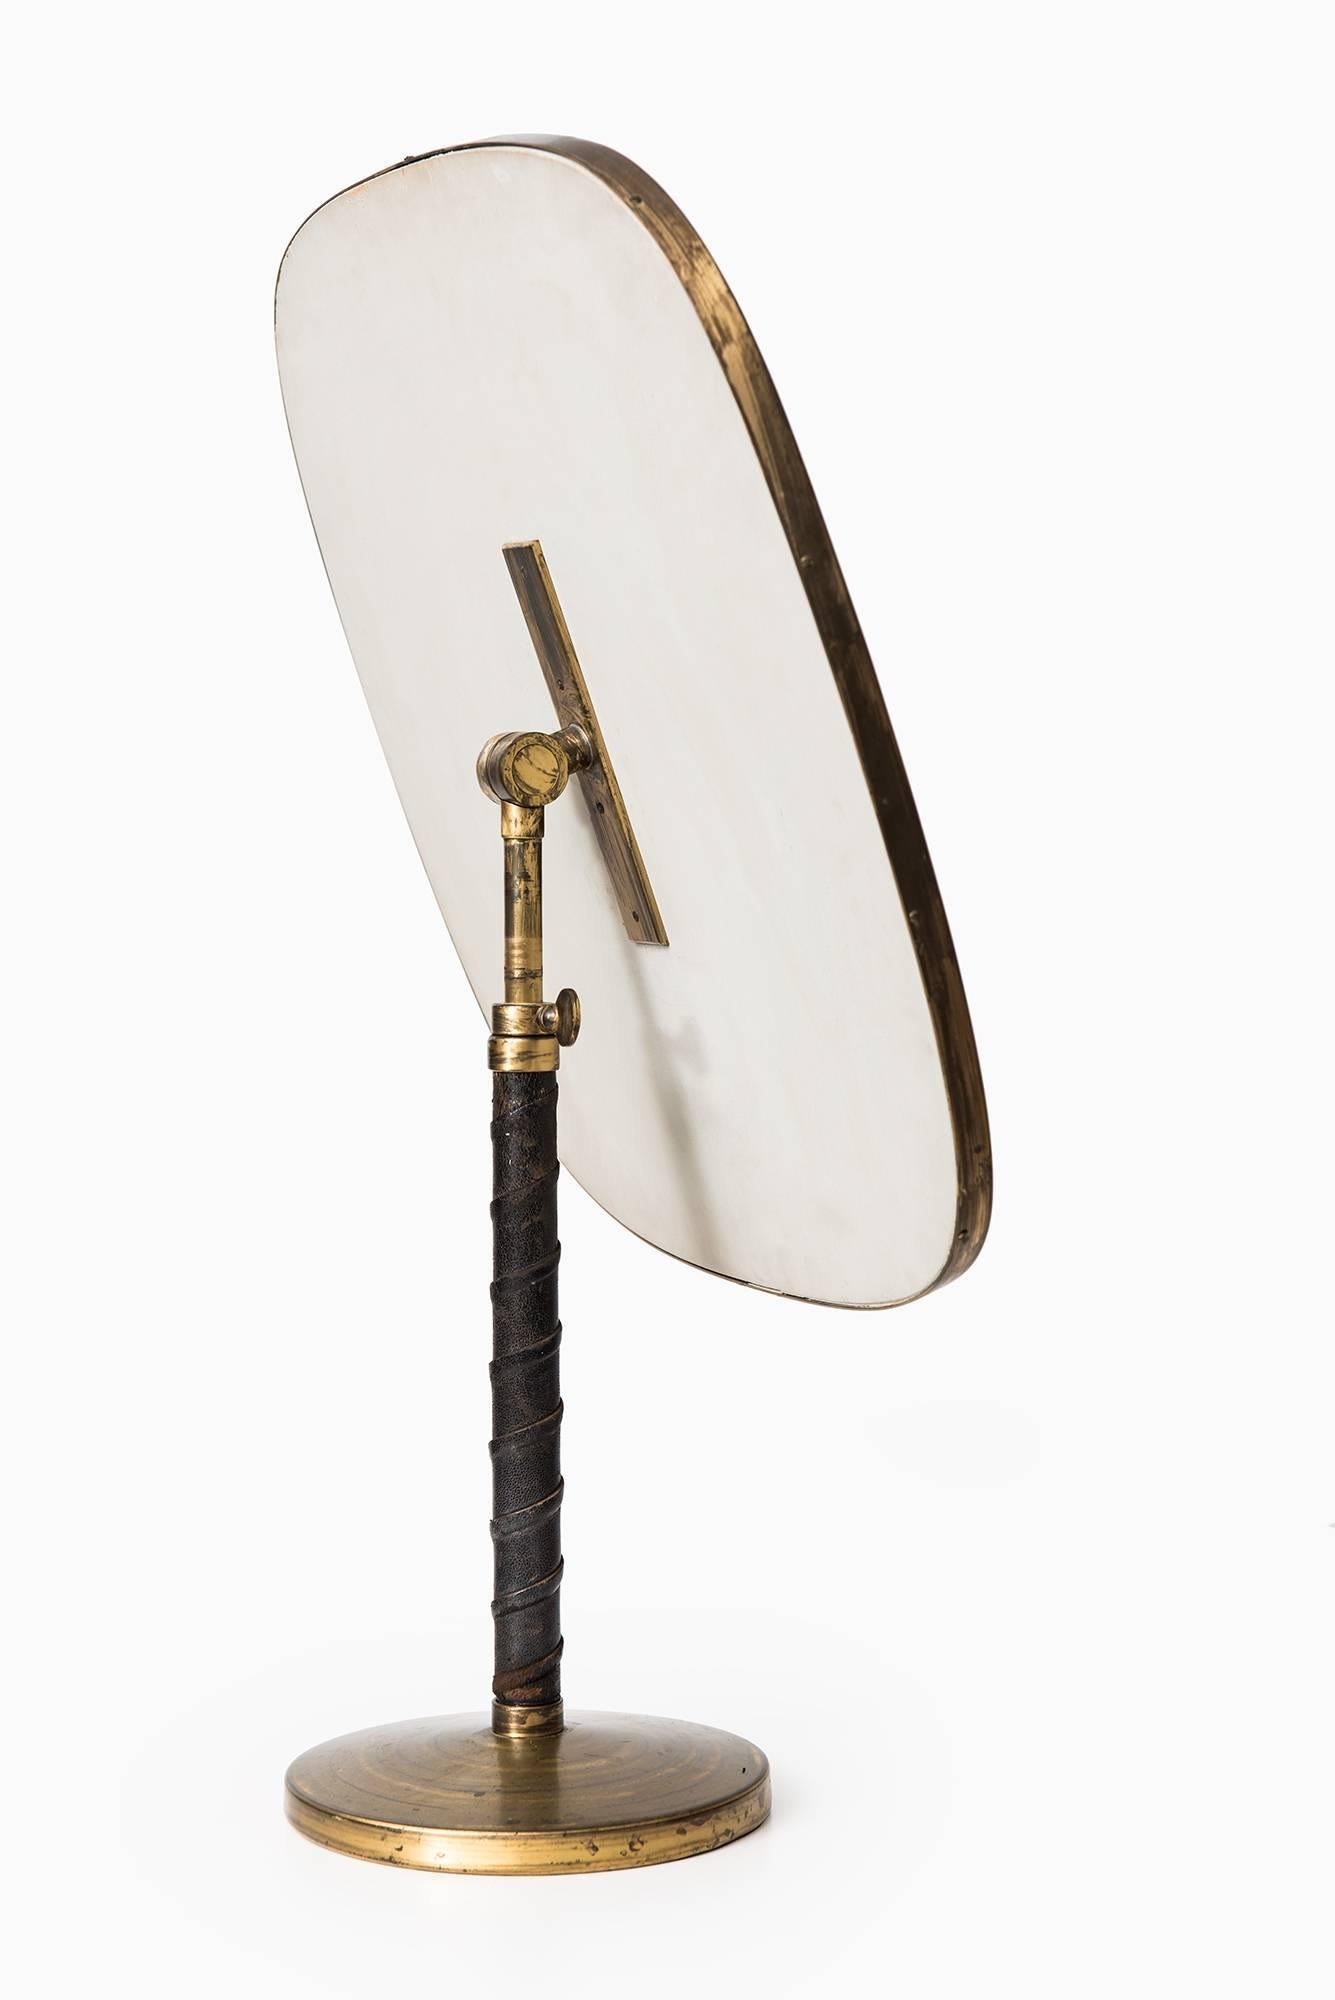 Rare height adjustable table mirror attributed to Josef Frank. Produced by Nordiska Kompaniet in Sweden.